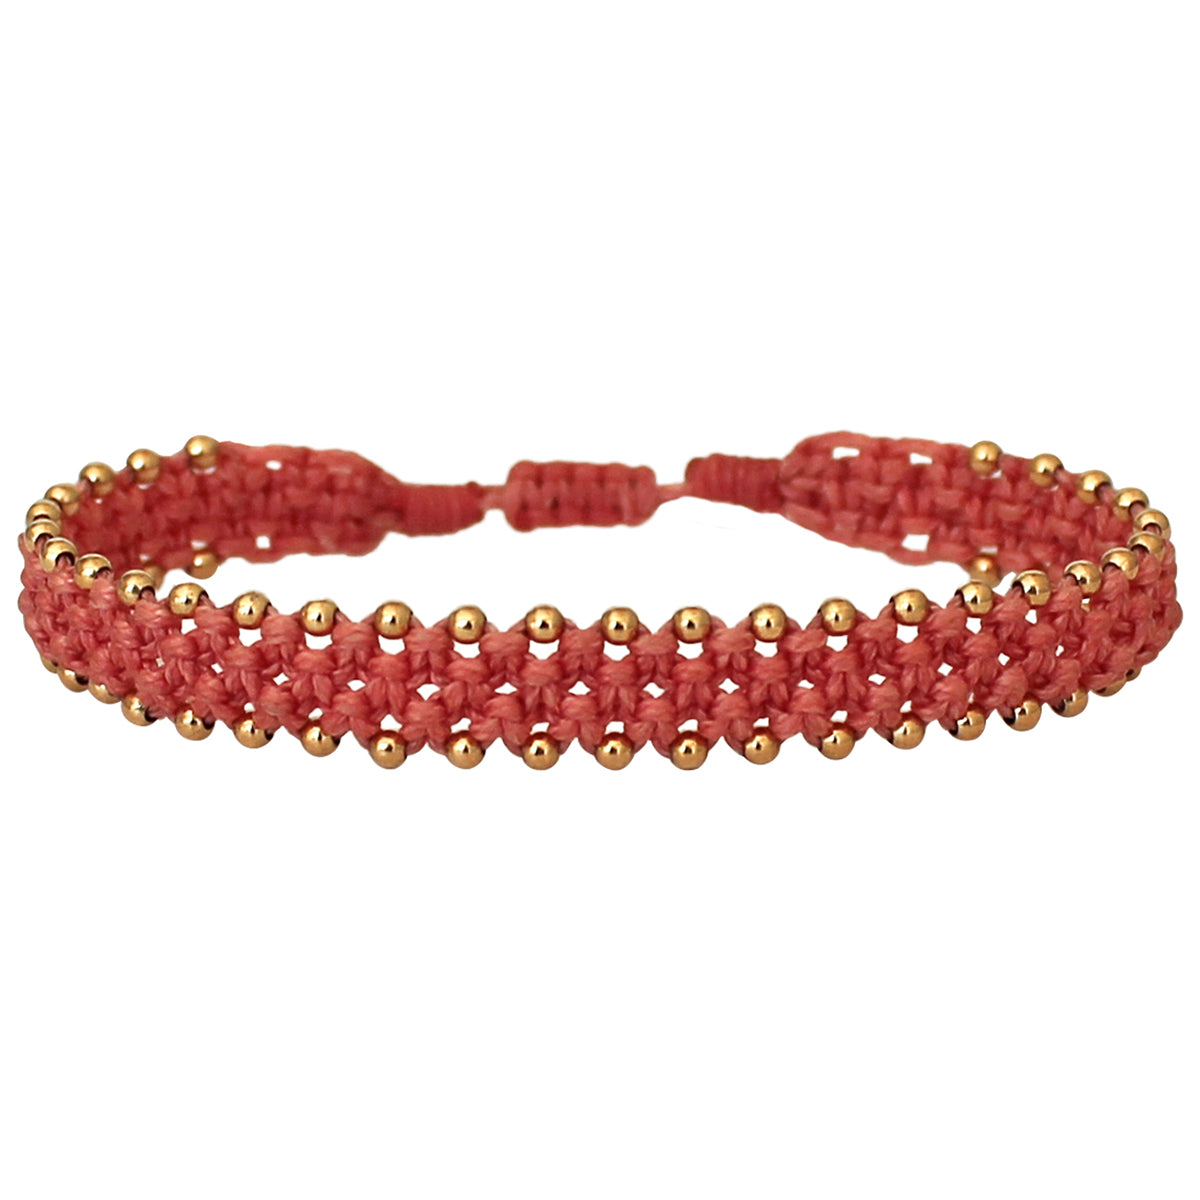 HANDMADE MACRAME BRACELET IN PINK WITH 14K GOLD FILLED BEADS